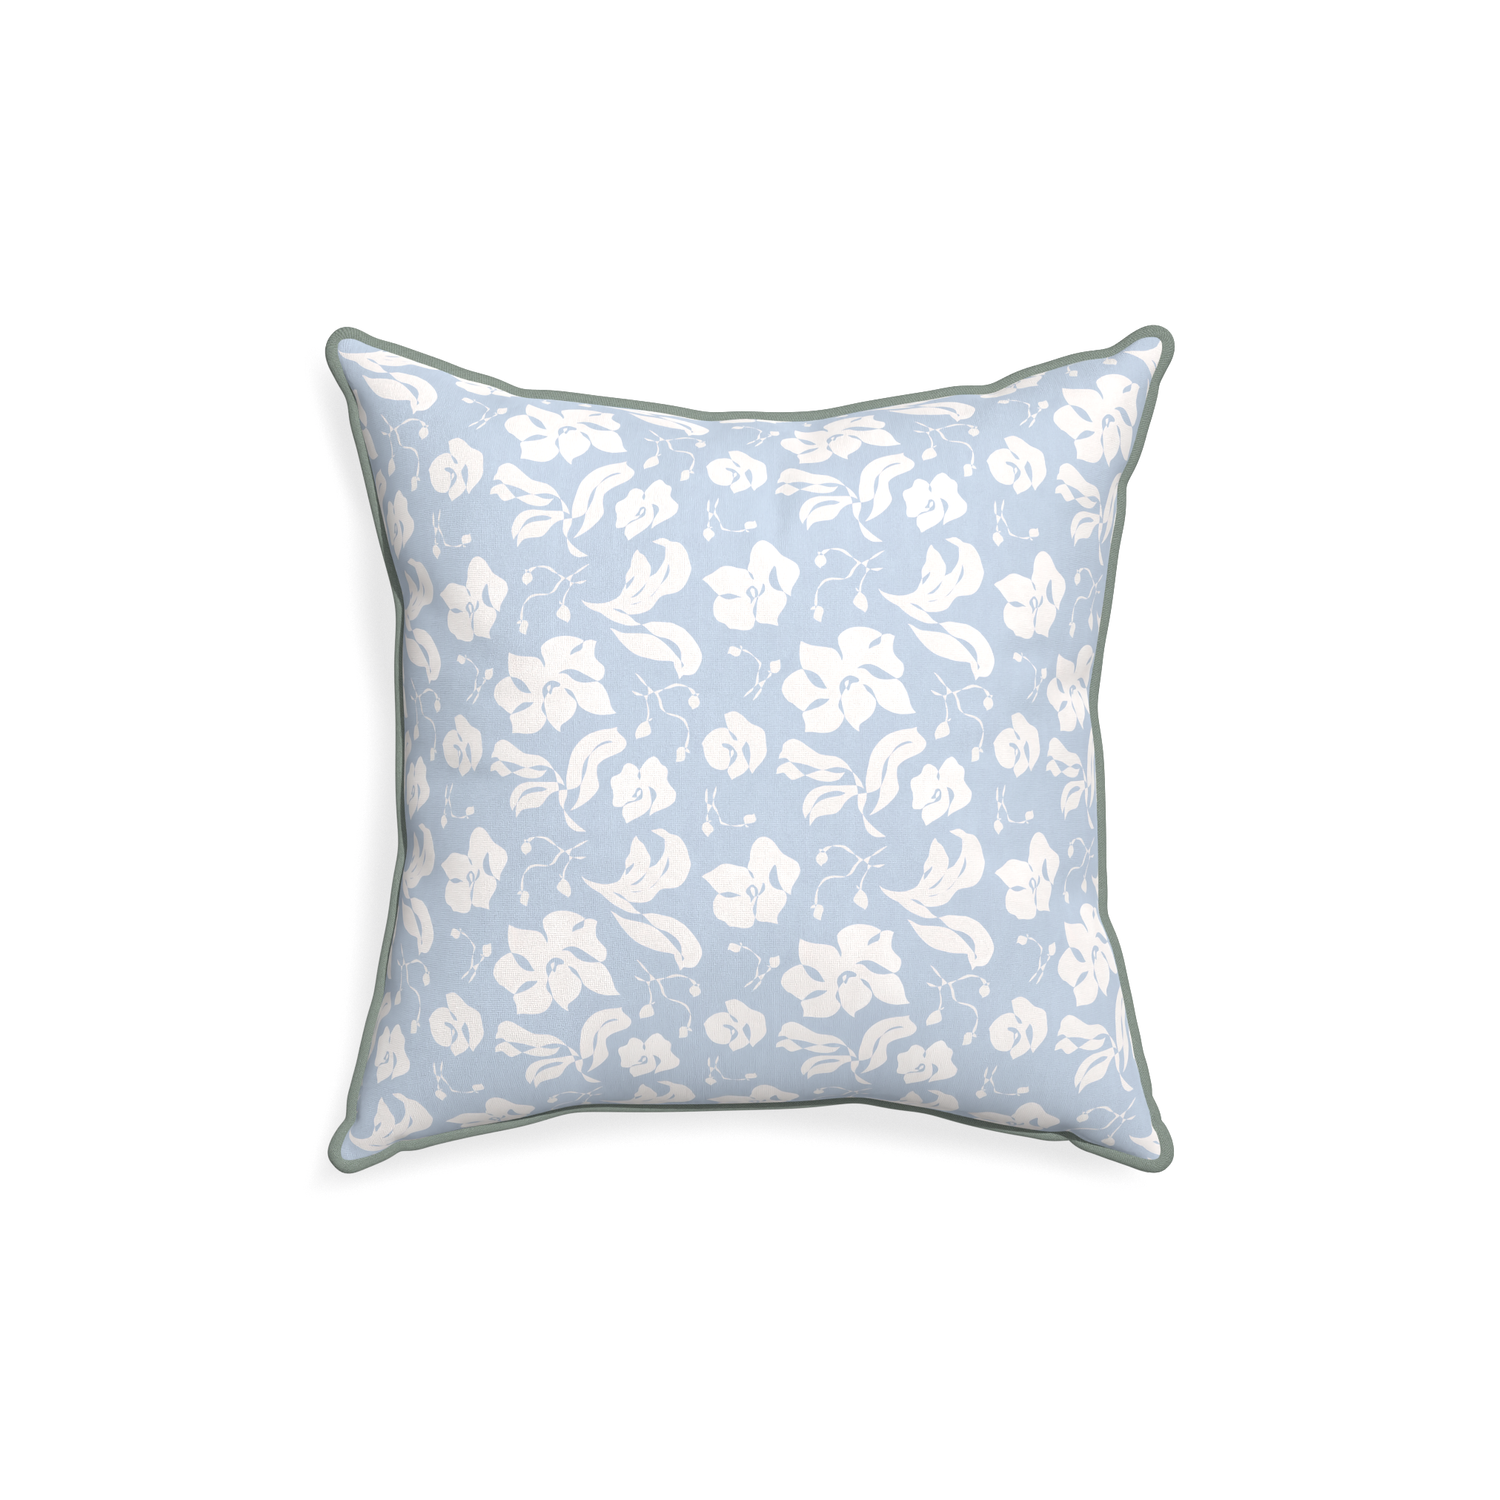 18-square georgia custom cornflower blue floralpillow with sage piping on white background